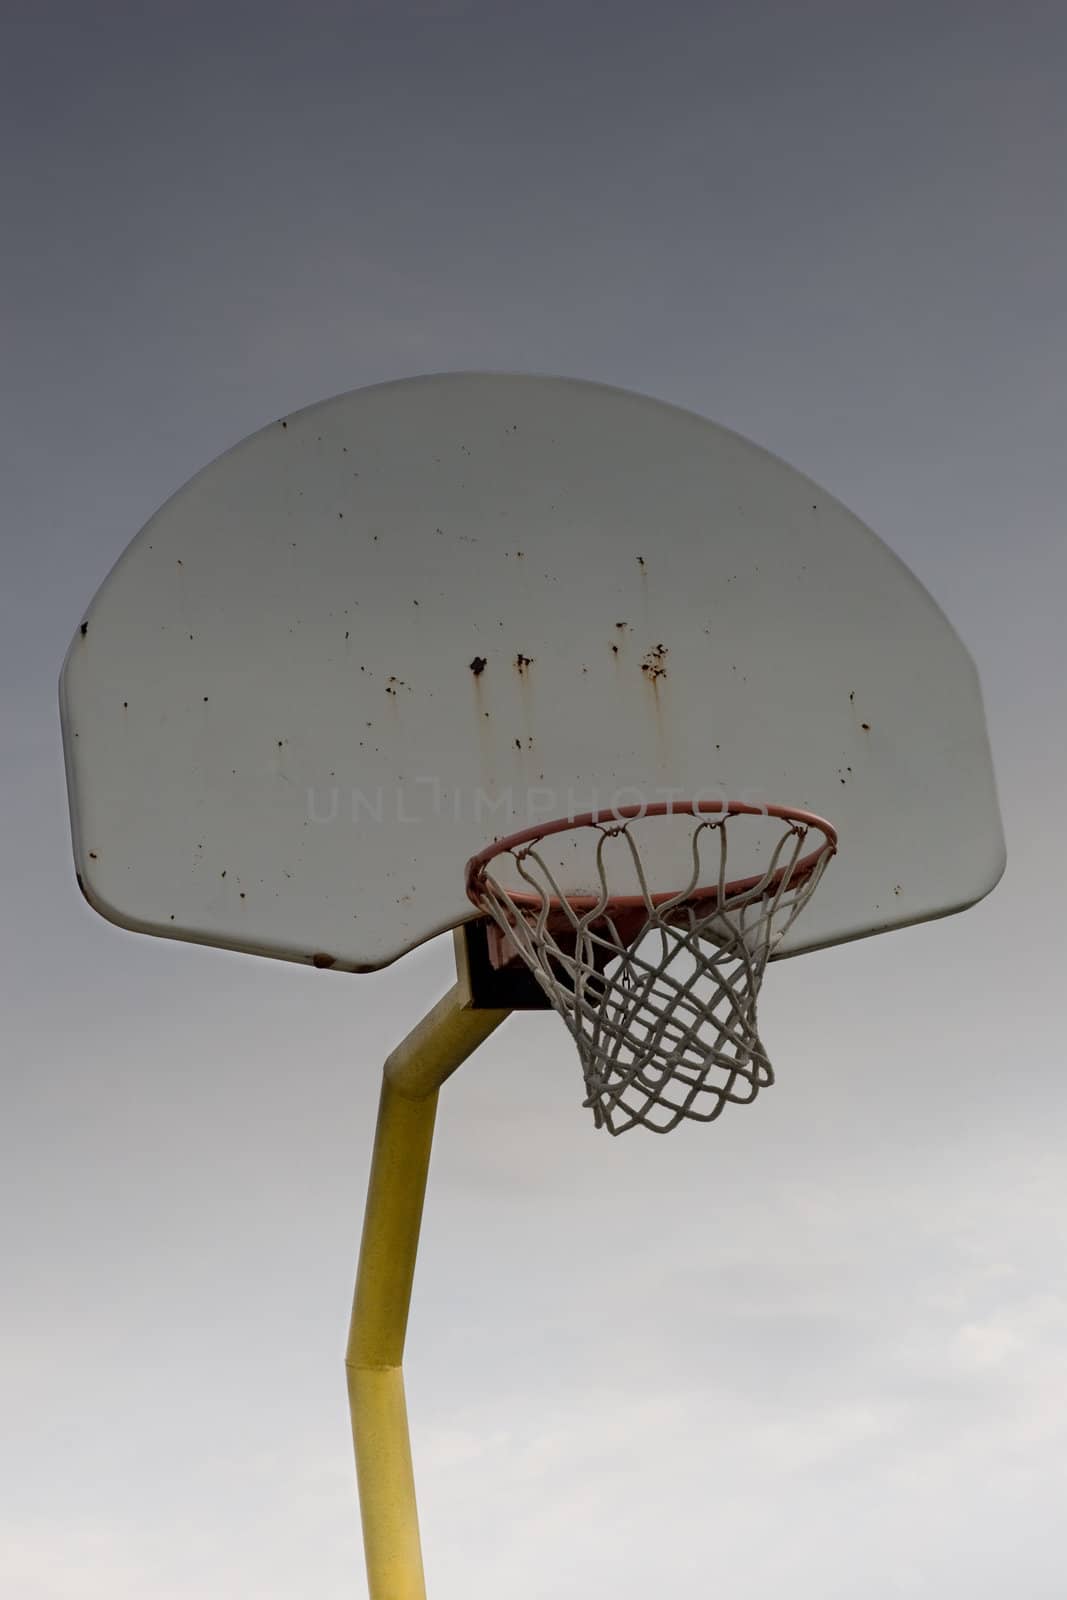 An isolated outdoor shot of a basketball net and backboard, with blue sky in the background.